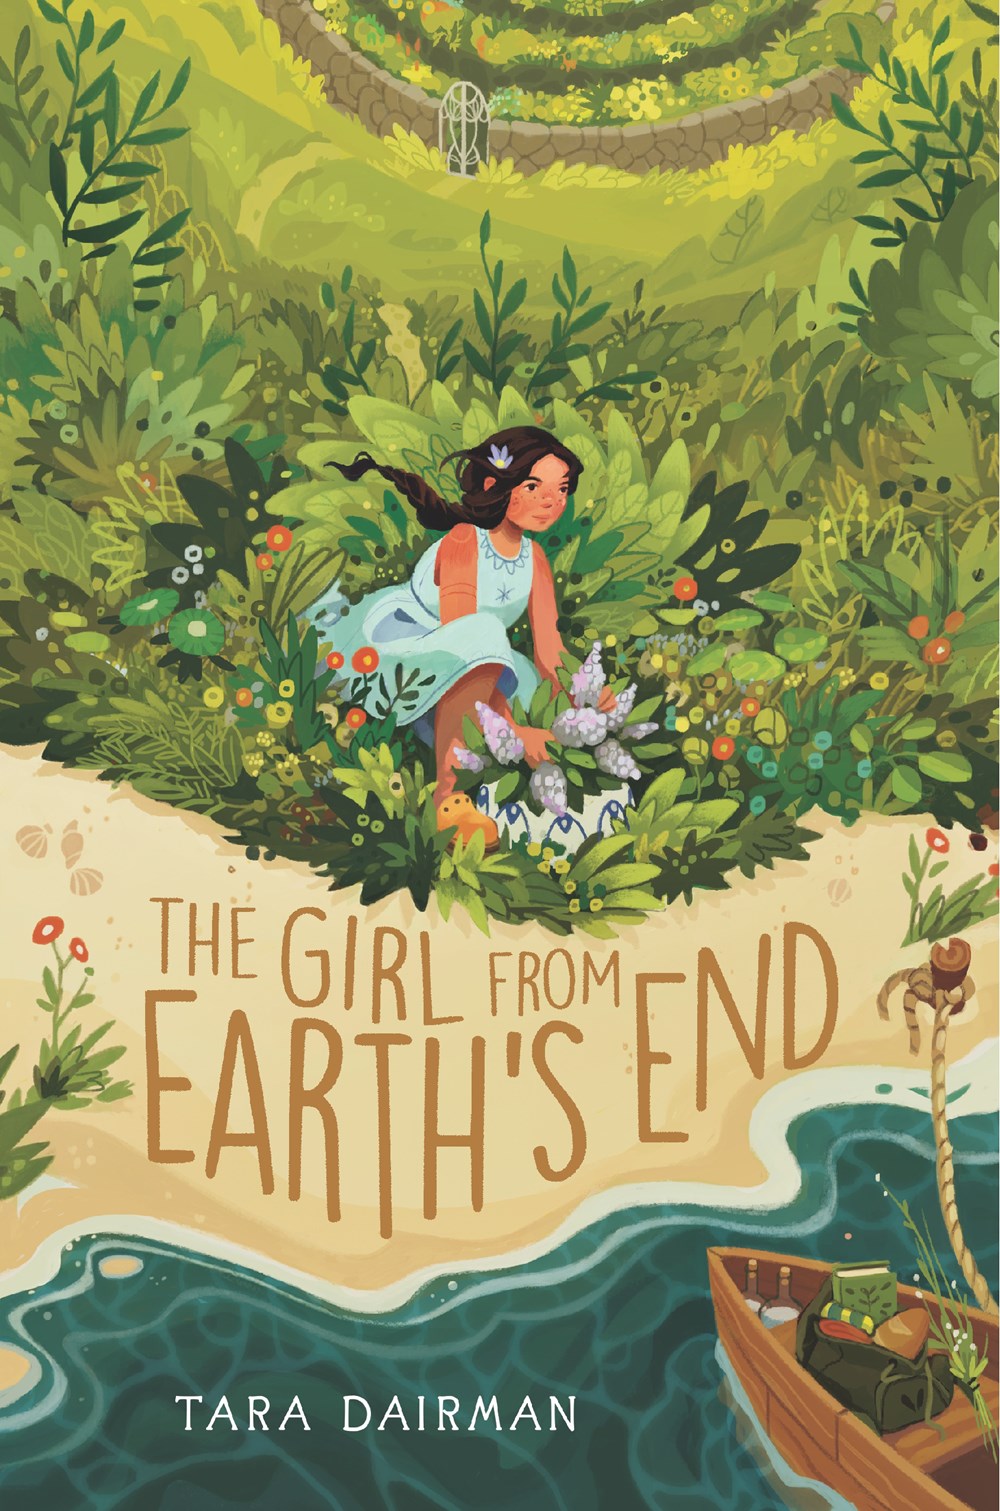 The Girl From Earth's End by Tara Dairman (Signed Copy)